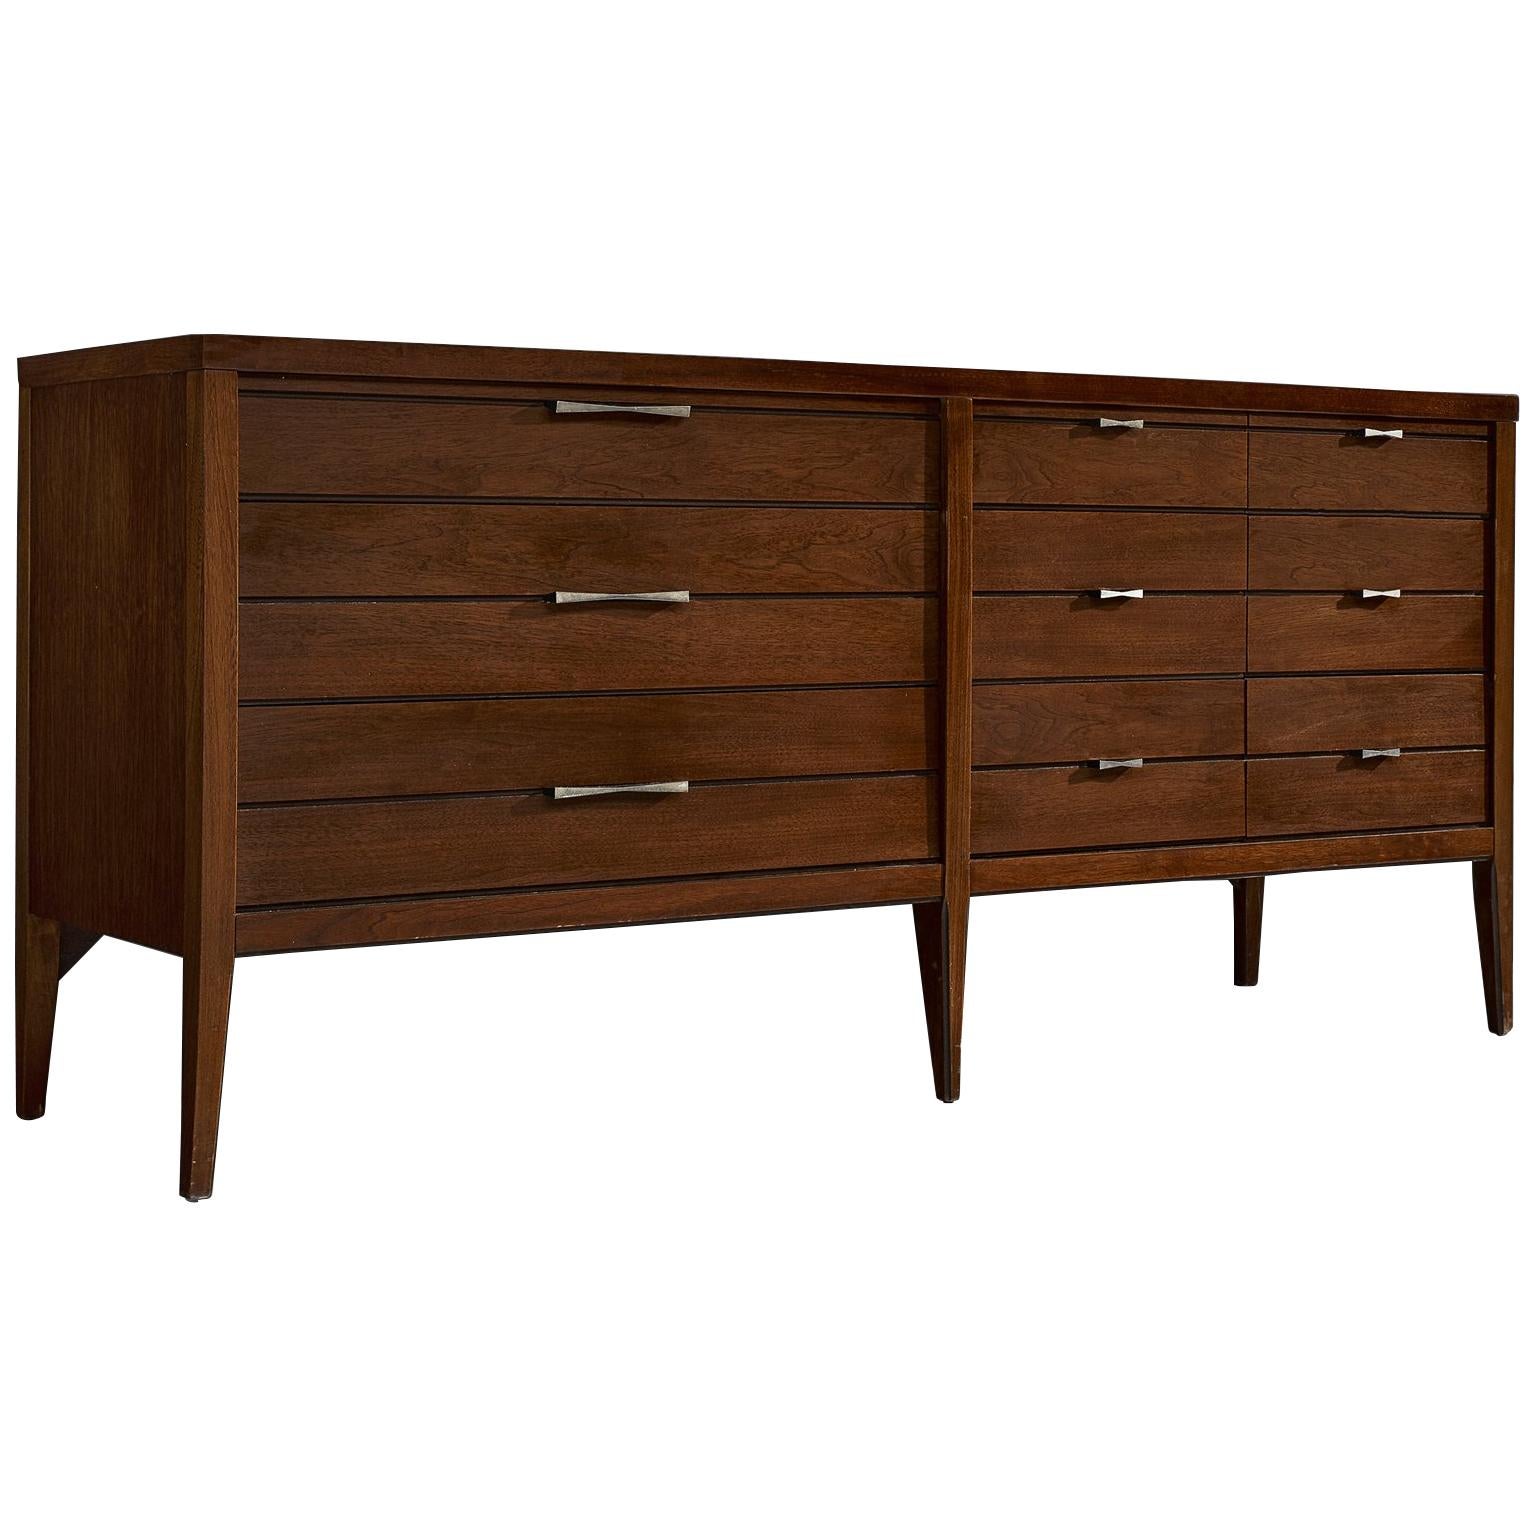 Sideboard with Butterfly Details in Walnut and Rosewood, circa 1950